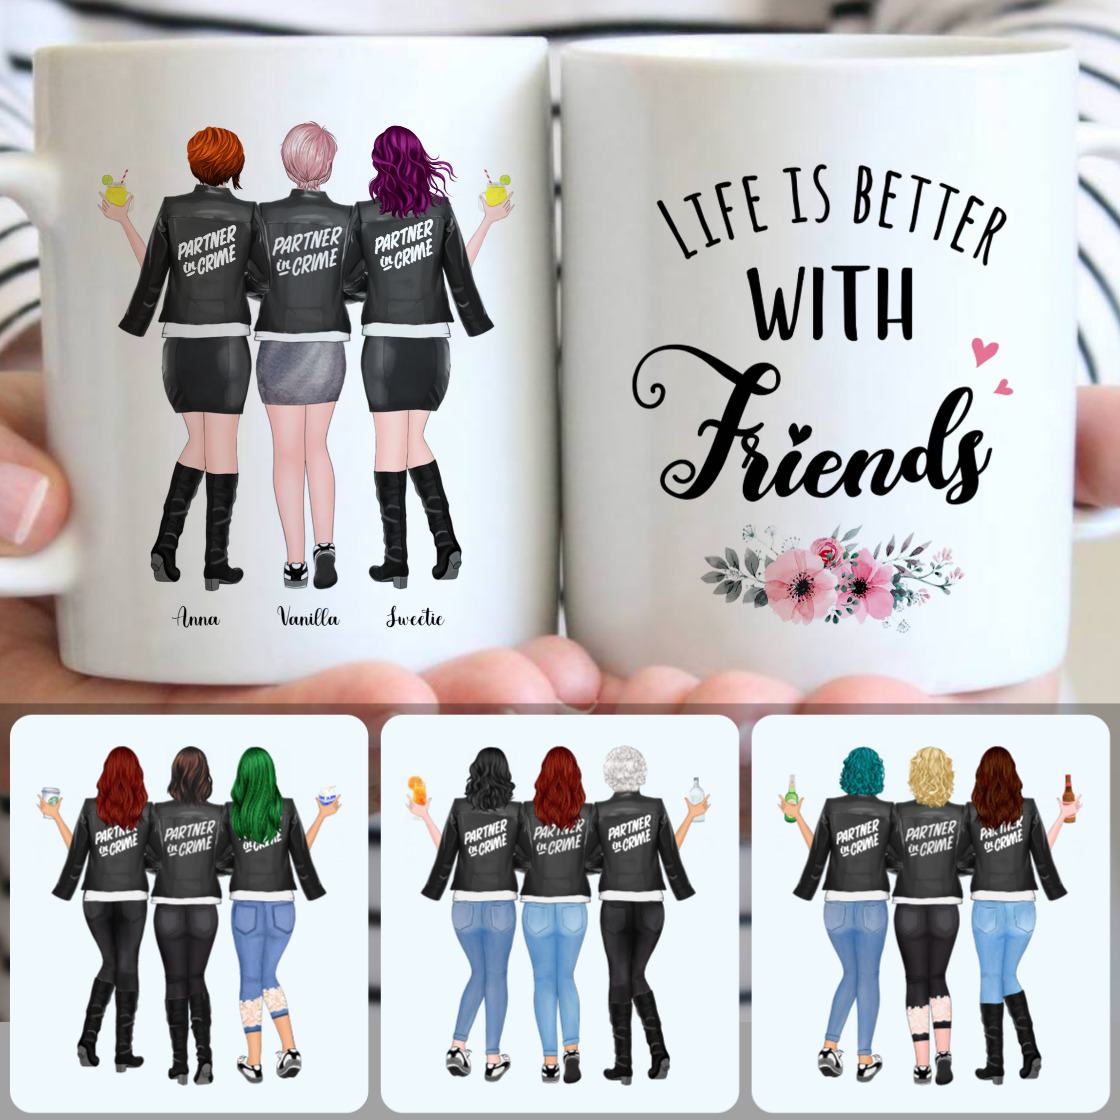 Personalized Mug, Unique Birthday Gifts, 3 Best Friends - Partner In Cream Customized Coffee Mug With Names